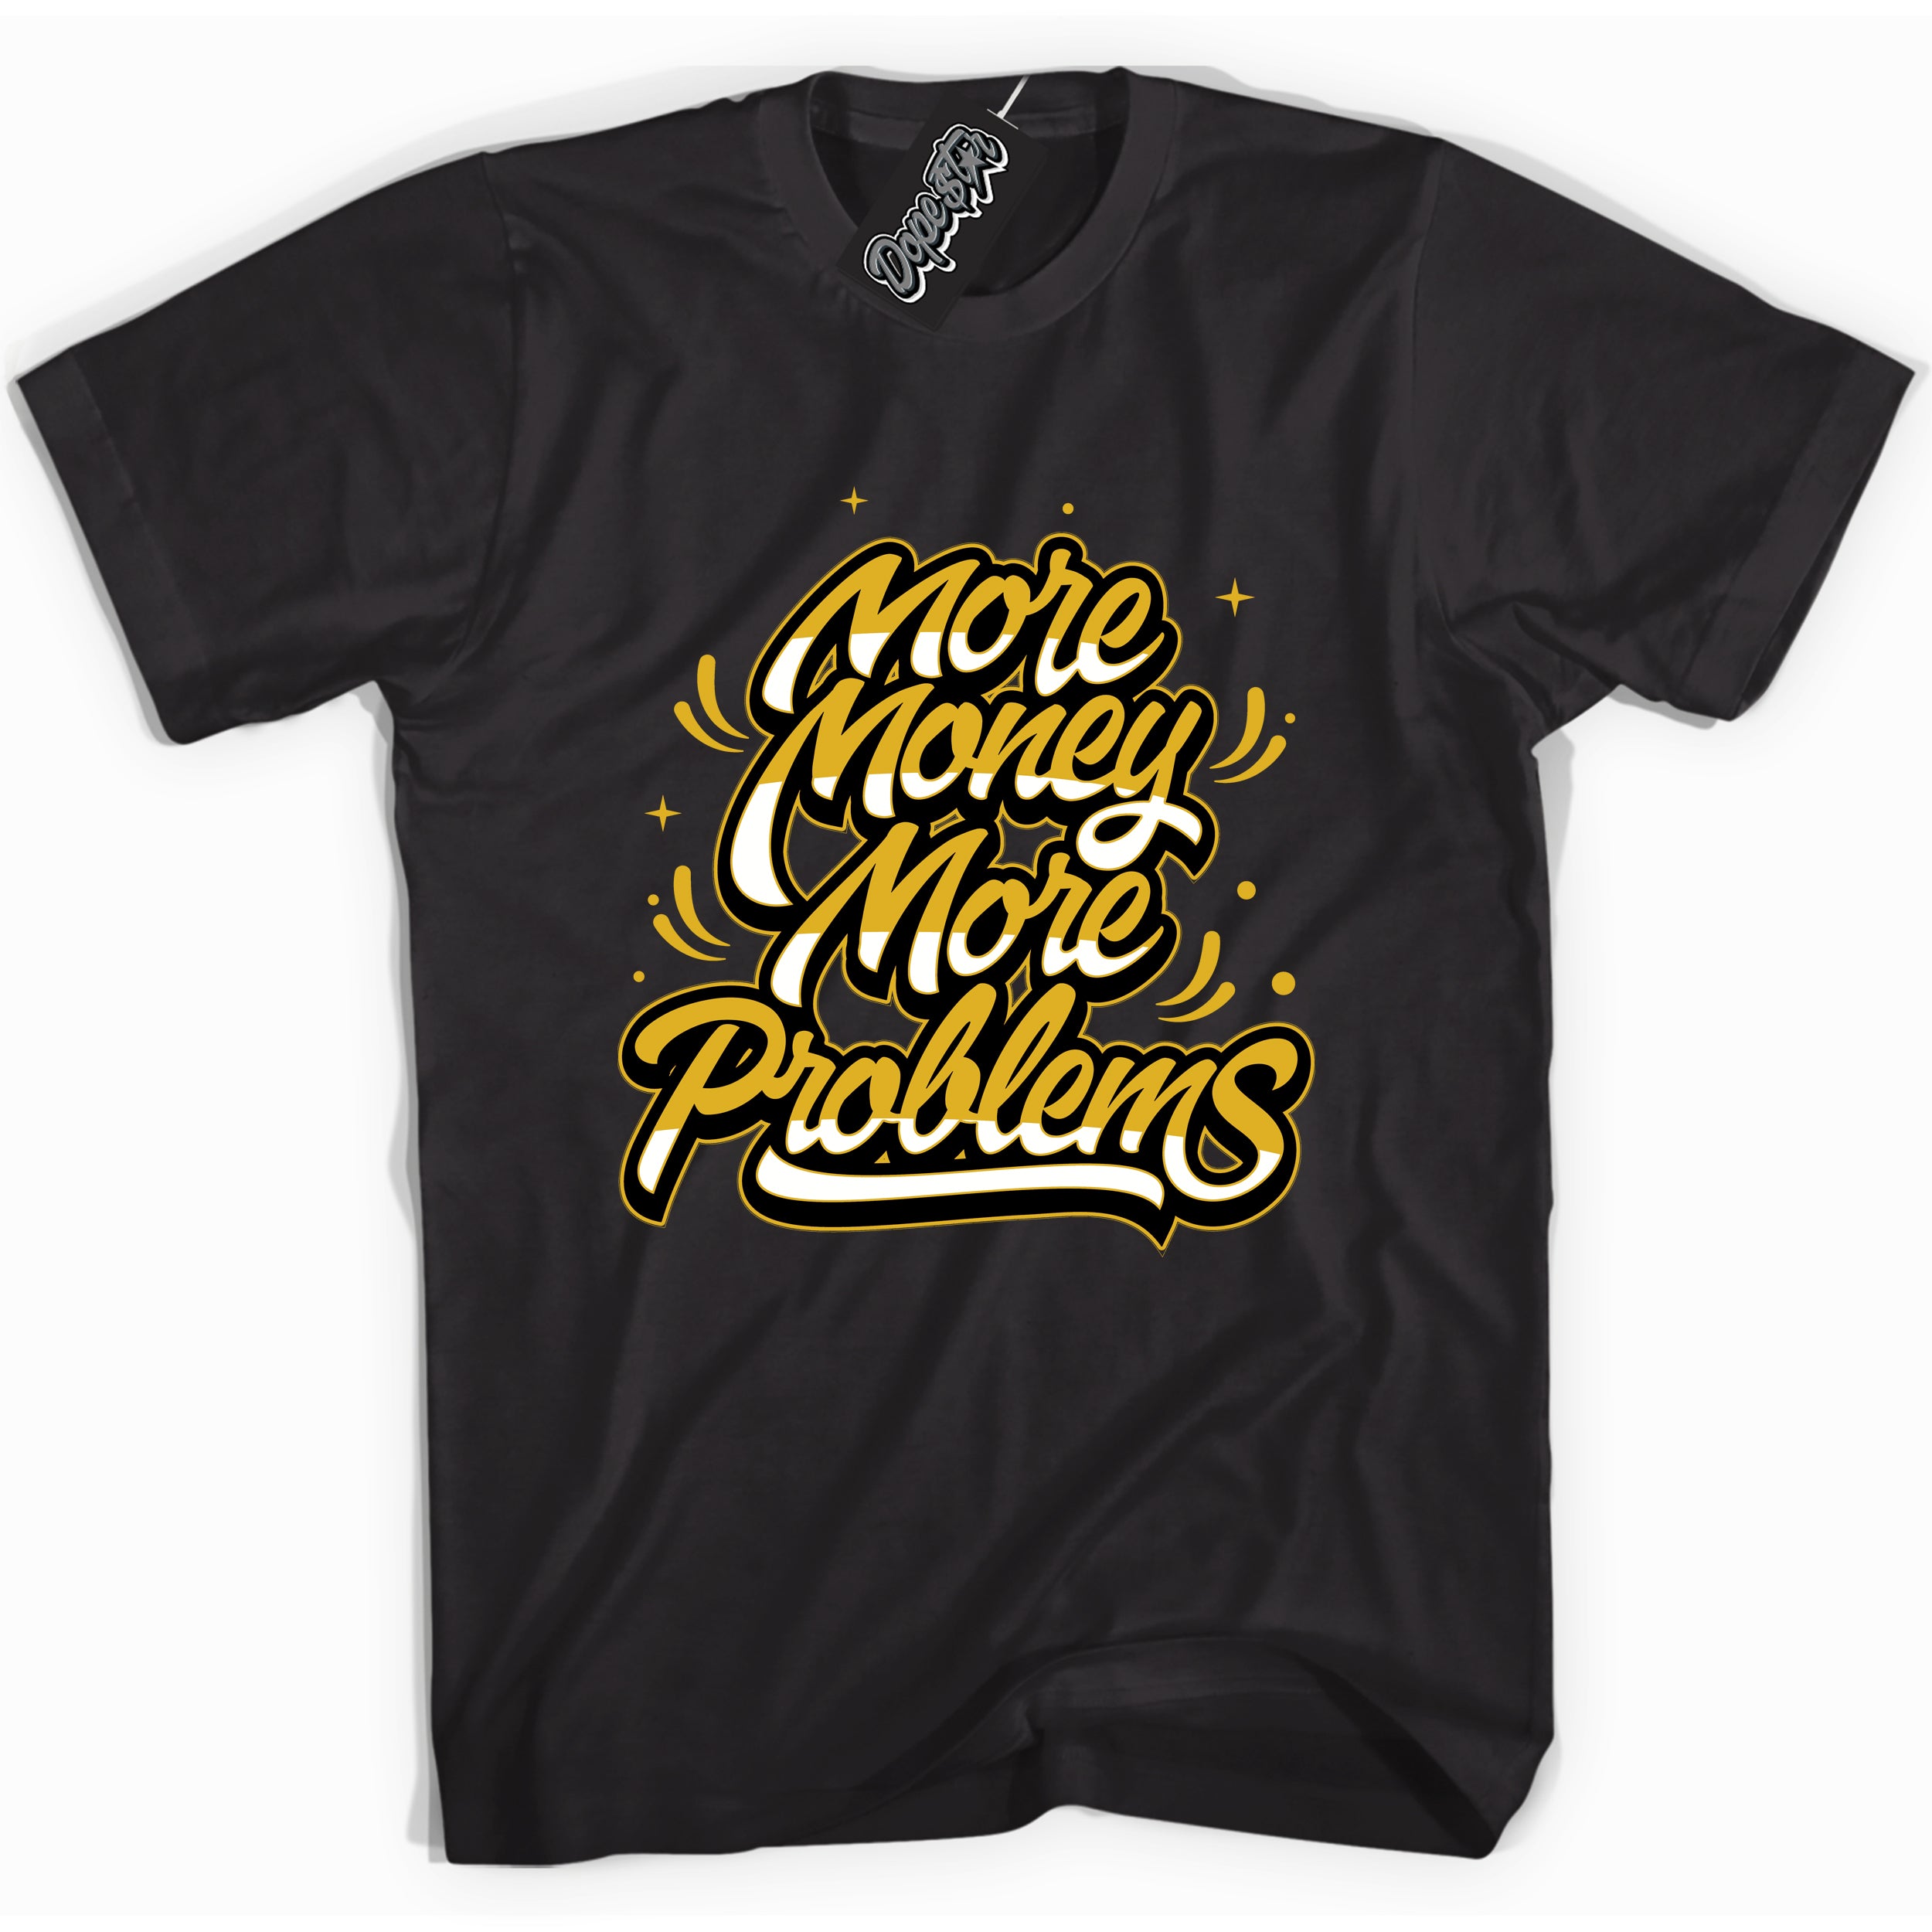 Cool Black Shirt With More Money More Problems design That Perfectly Matches AIR JORDAN 6 RETRO YELLOW OCHRE Sneakers.